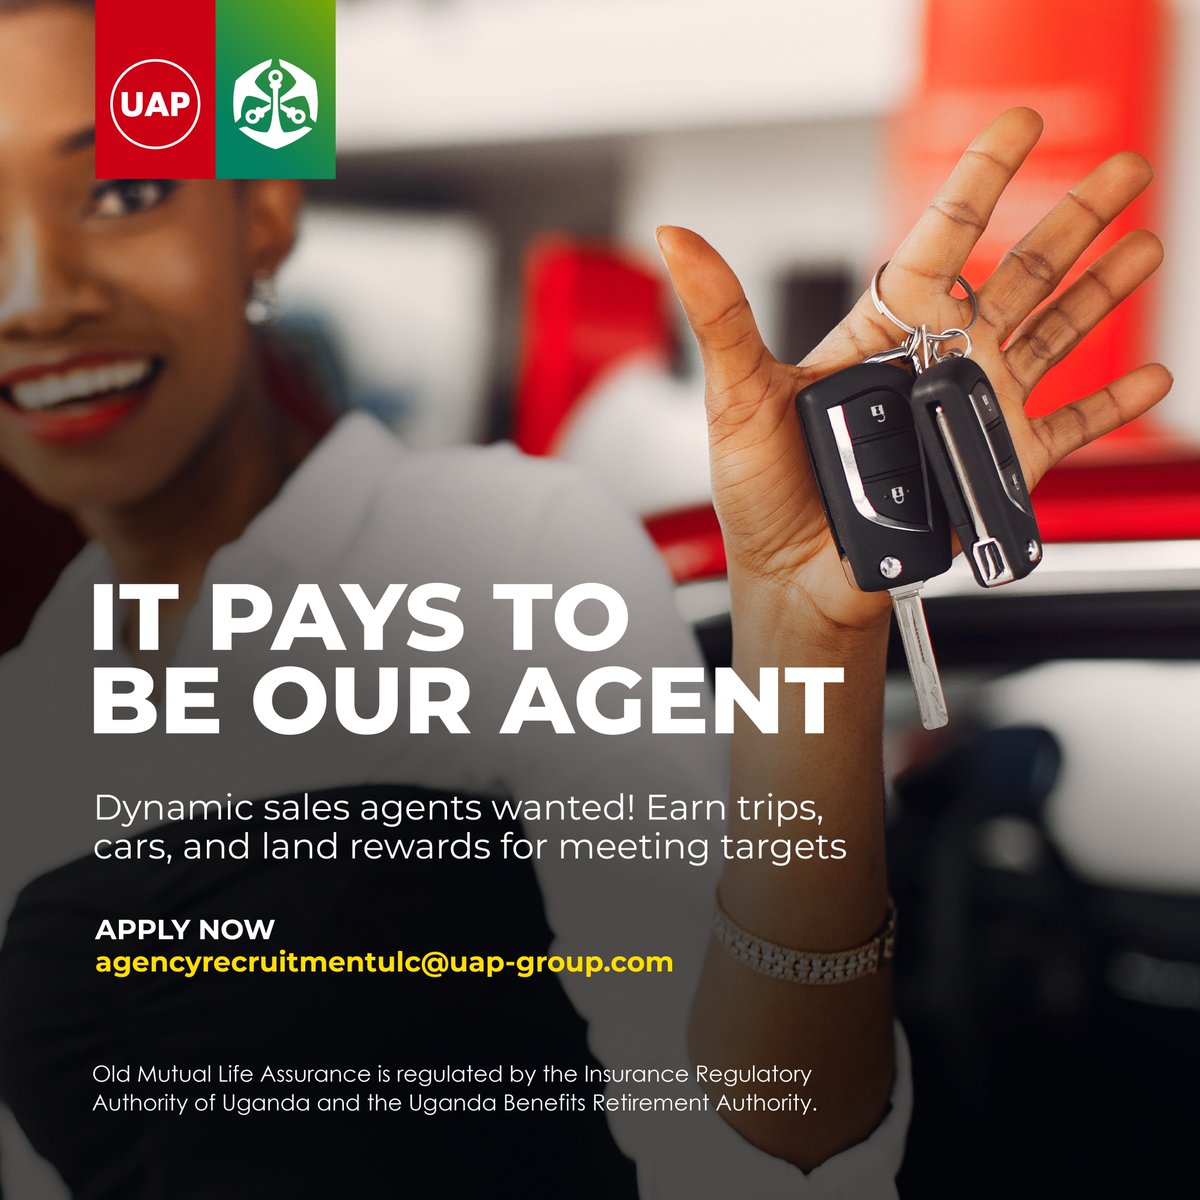 Join the Old Mutual Life Assurance family and unlock a world of rewards! Sales agents who meet targets enjoy thrilling trips, luxurious car gifts, and even land titles. Send your application to: agencyrecruitmentulc@uap-group.com, for your chance to join us. #TutambuleFfena